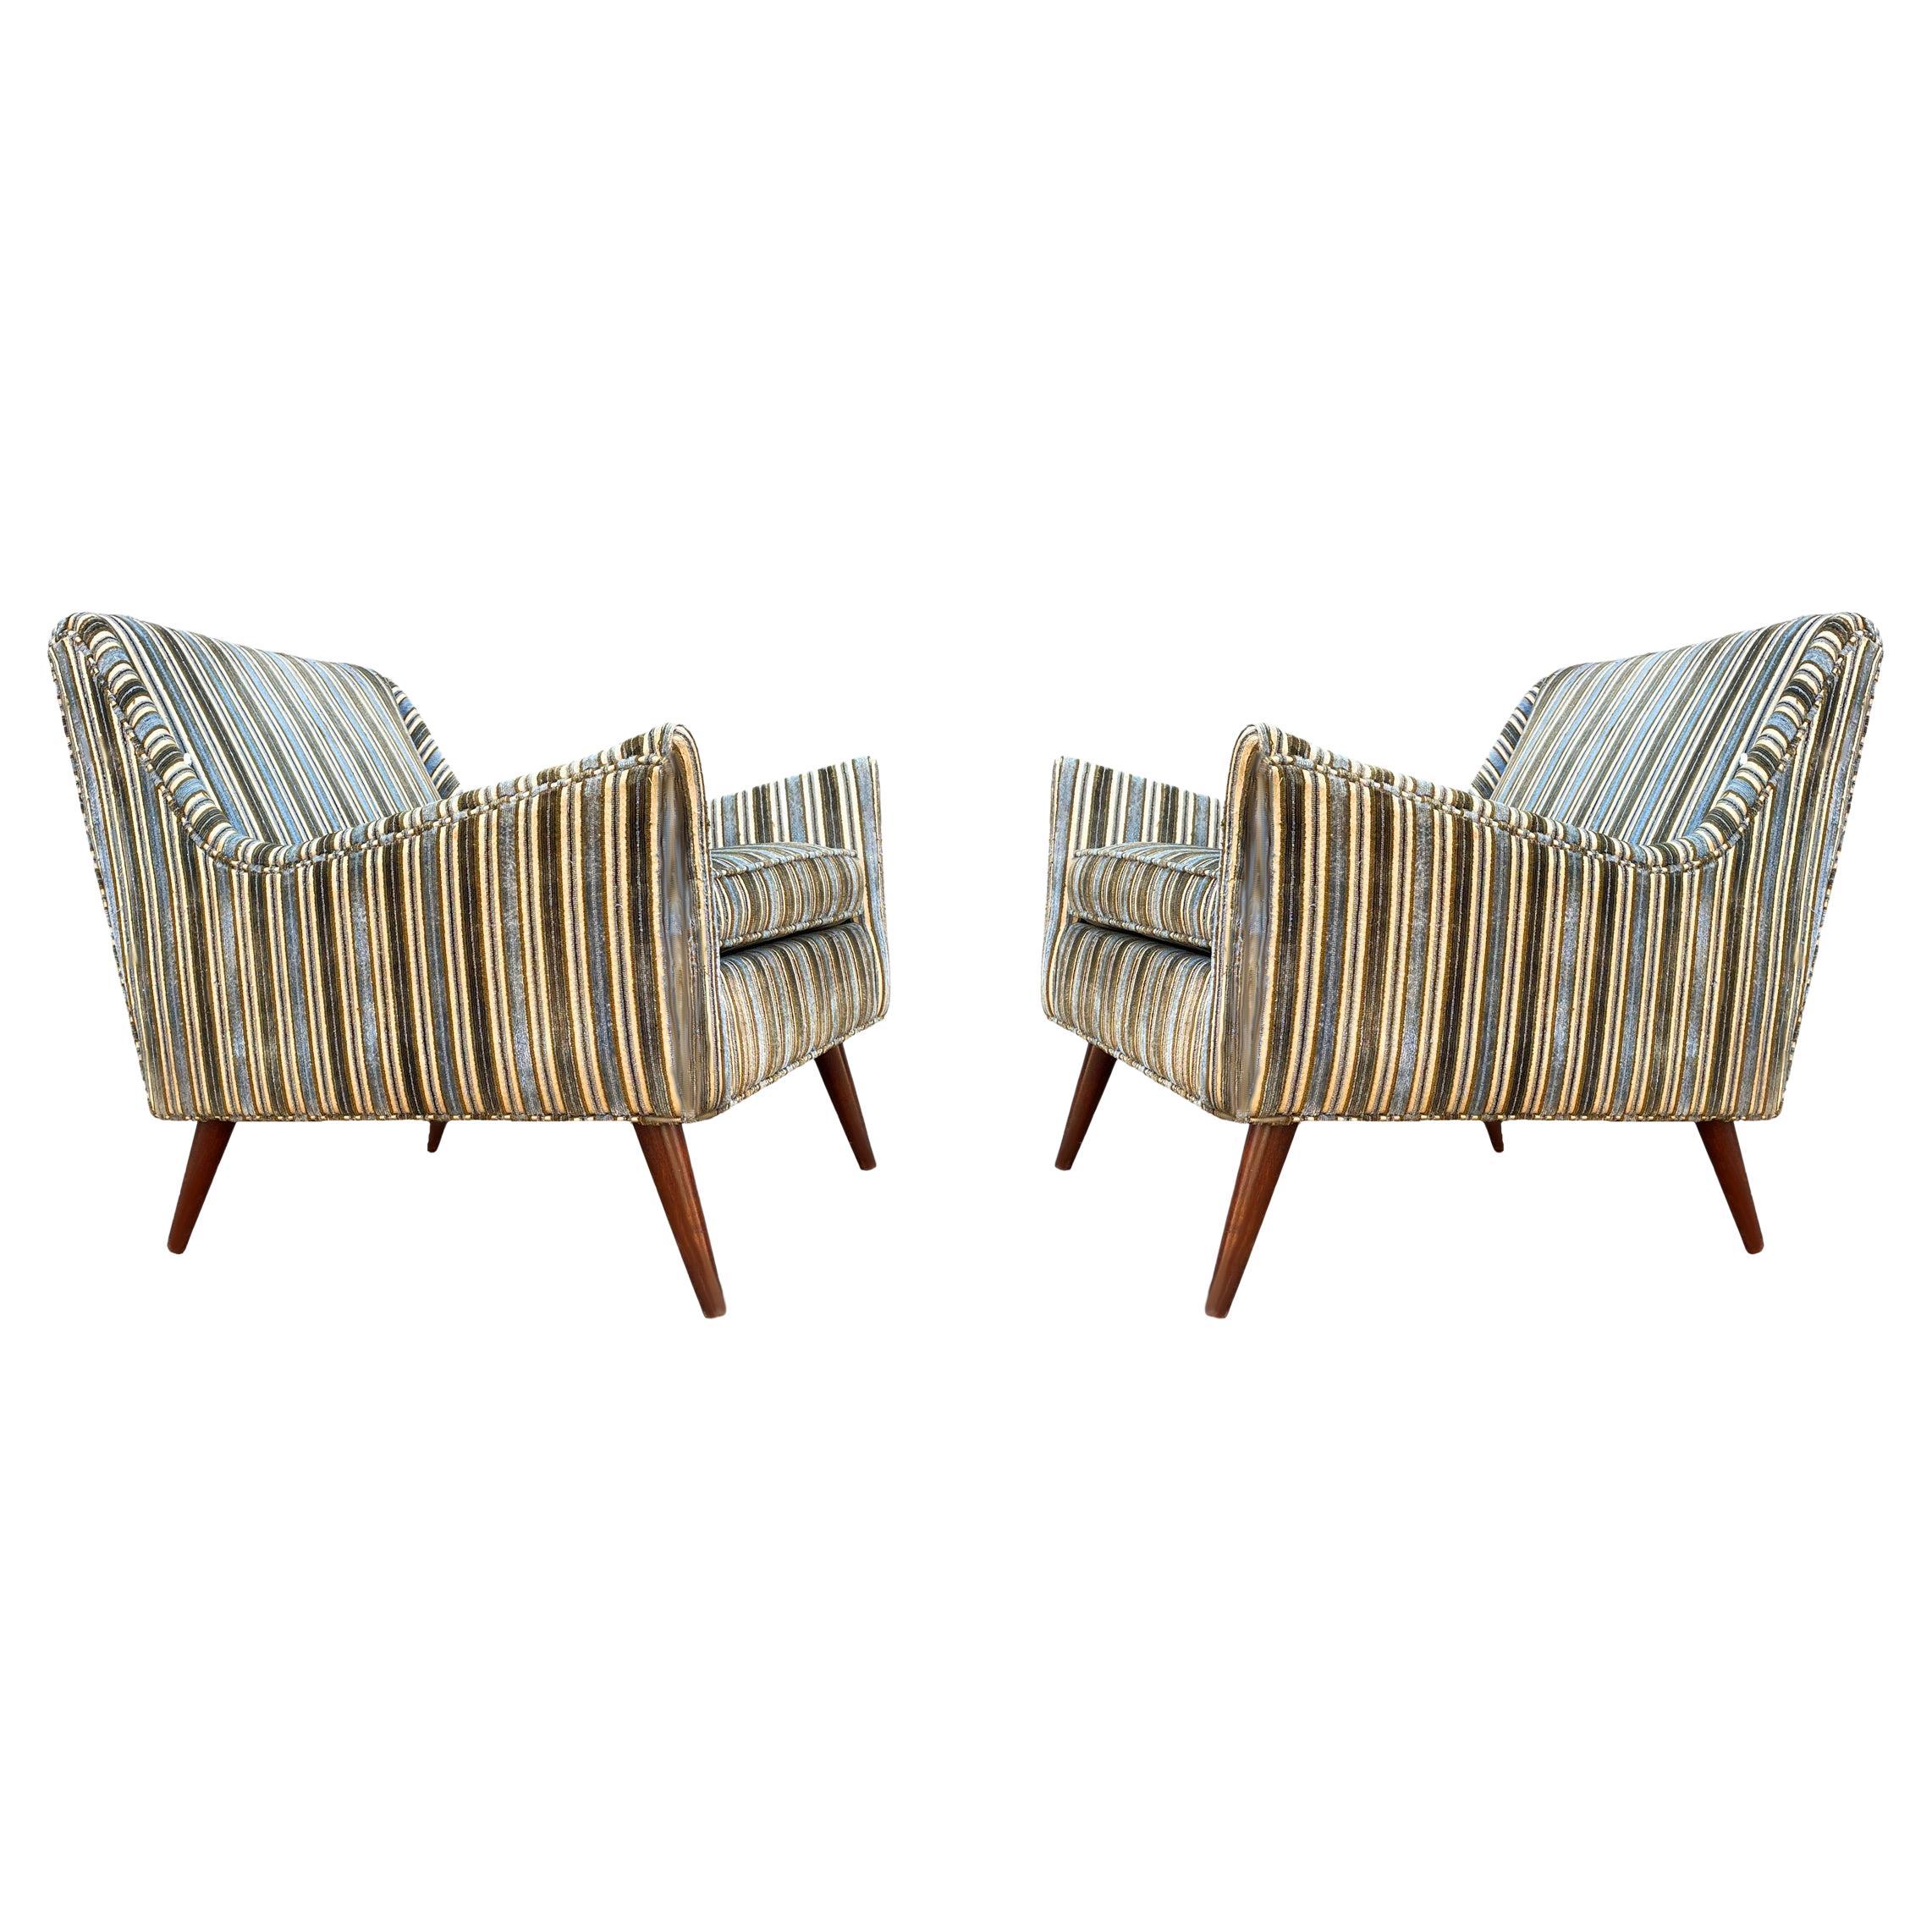 Pair of Mid-Century Modern Sculptural Lounge Chairs in the the of Harvey Probber For Sale